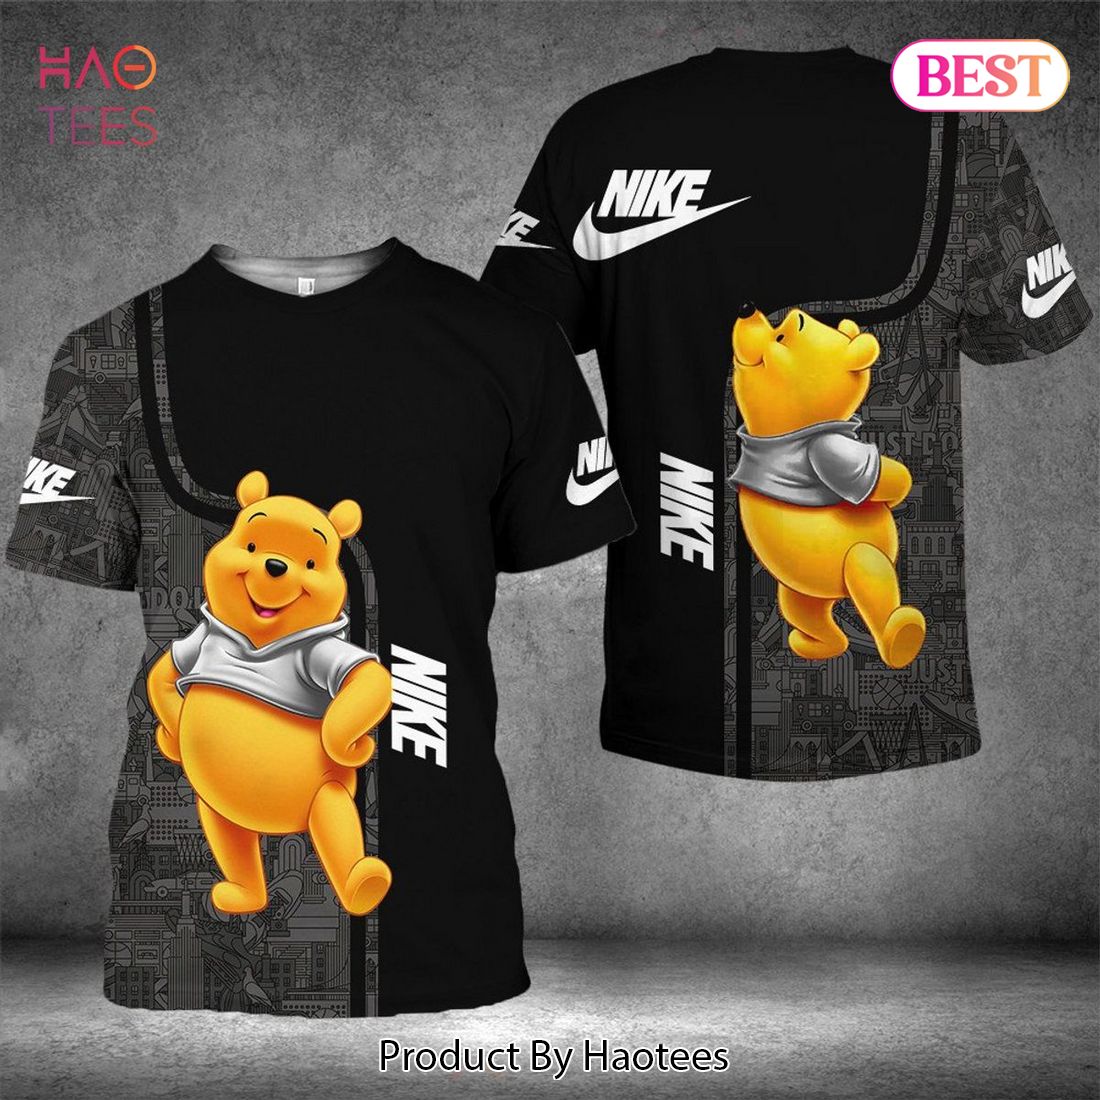 TRENDDING Nike Design Winne The Pooh Luxury Brand 3D T-Shirt Limited Edition